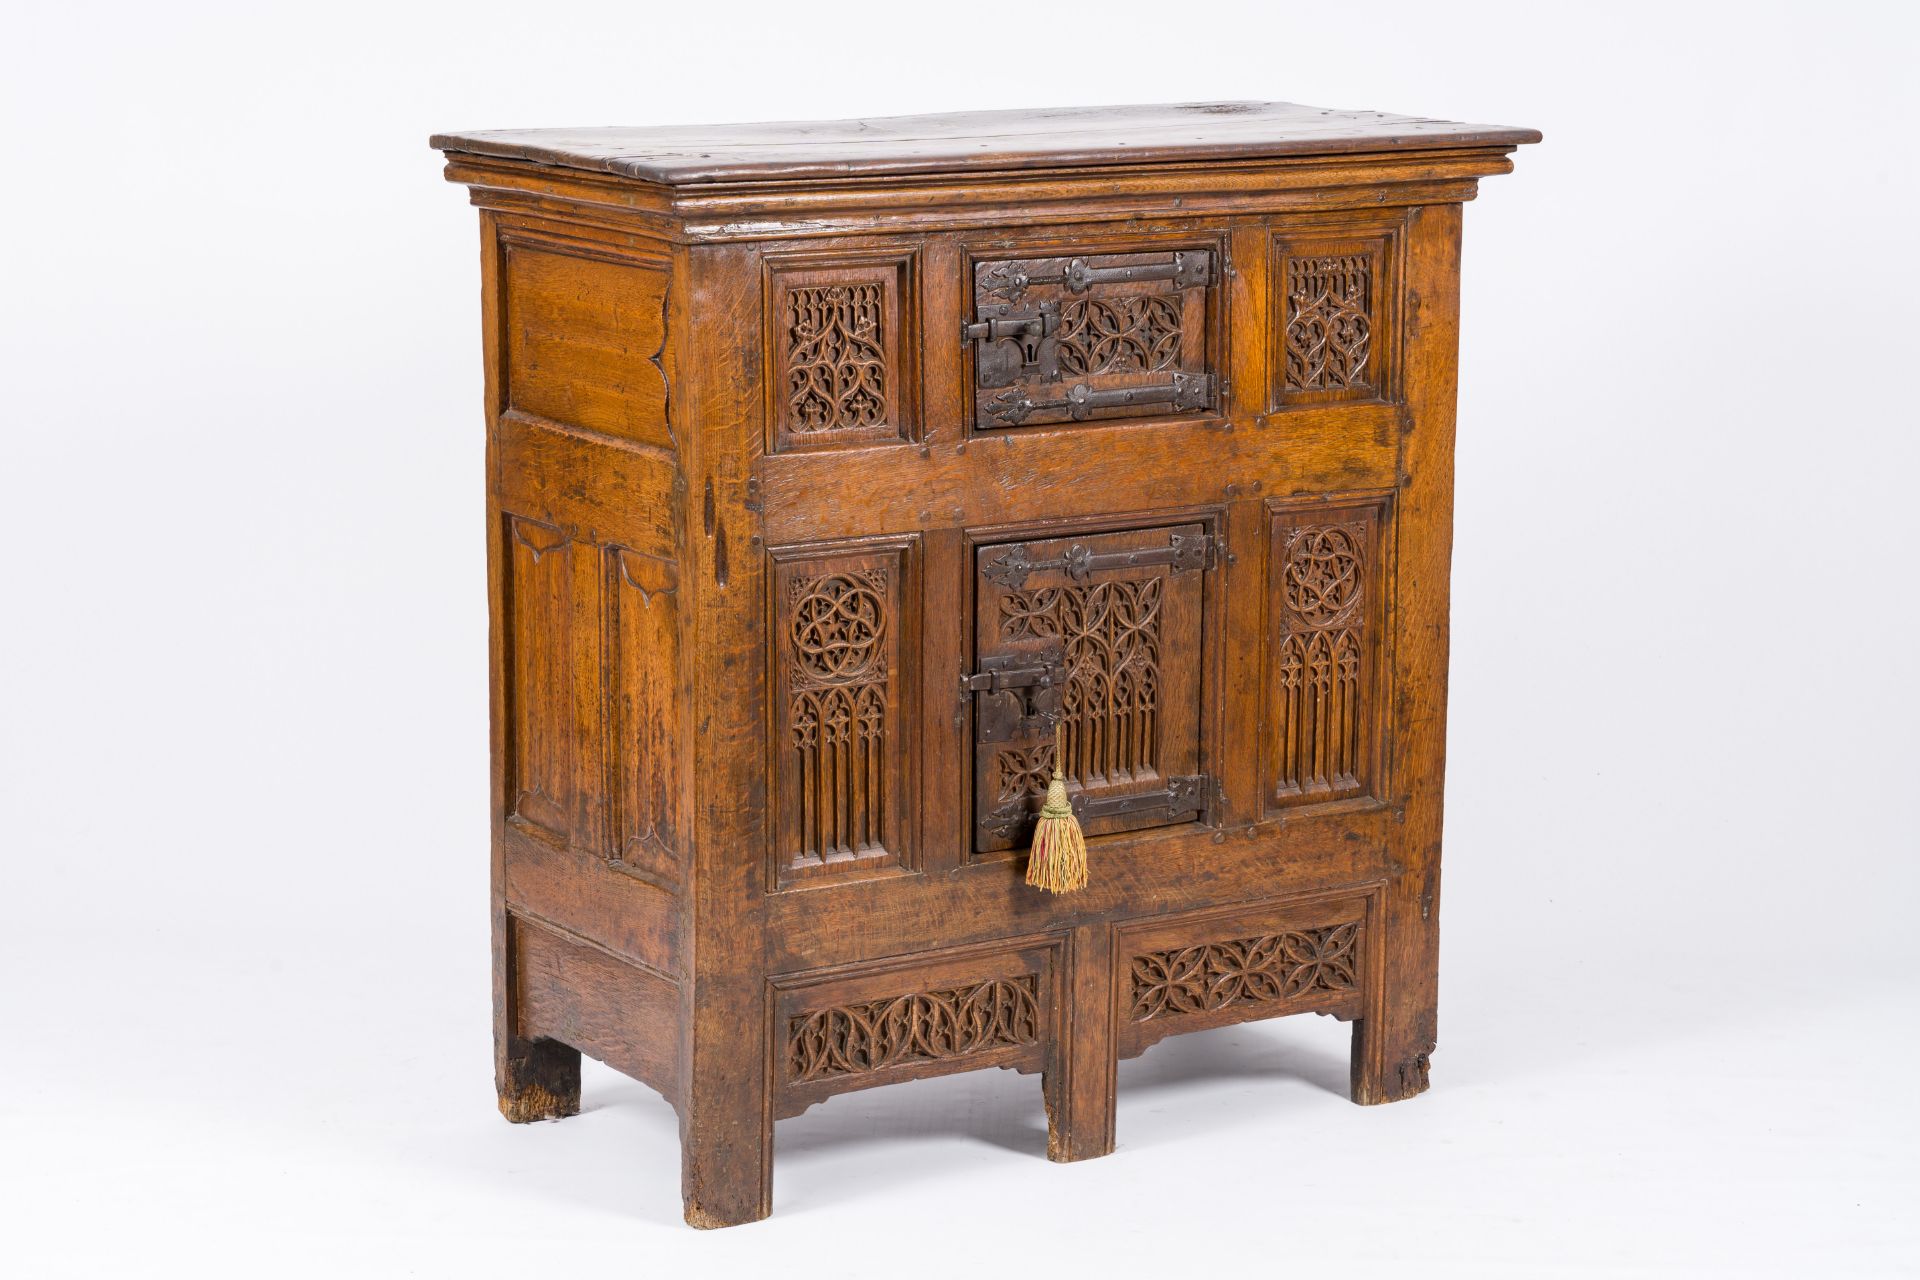 An exceptional Gothic wood two-door cupboard with linenfold and tracery panels, early 16th C.